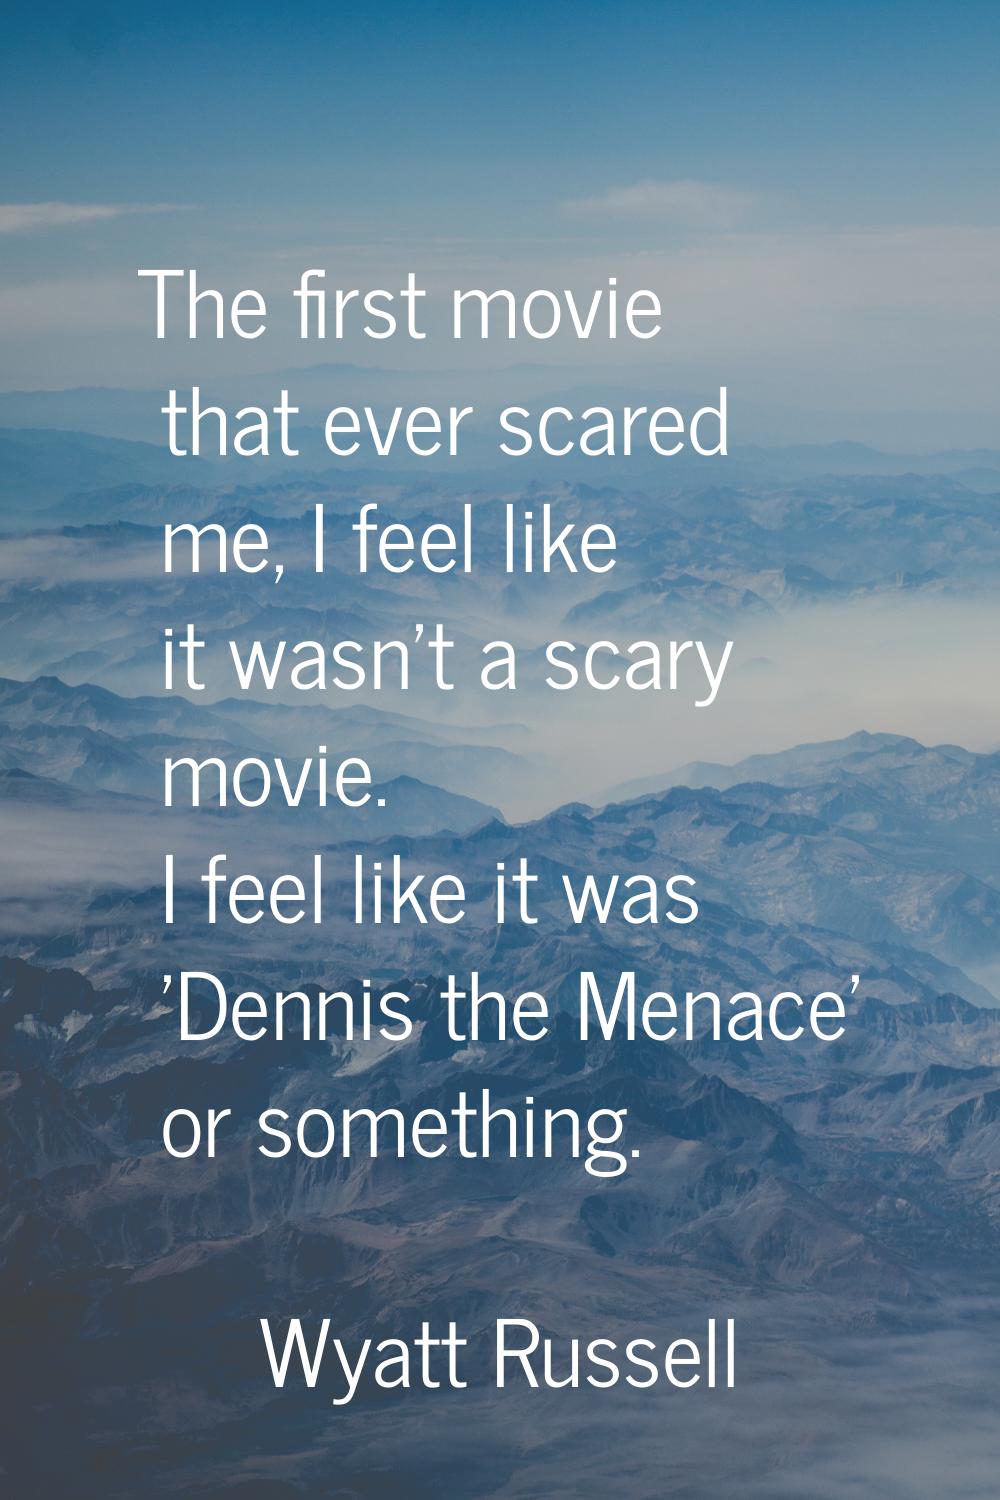 The first movie that ever scared me, I feel like it wasn't a scary movie. I feel like it was 'Denni